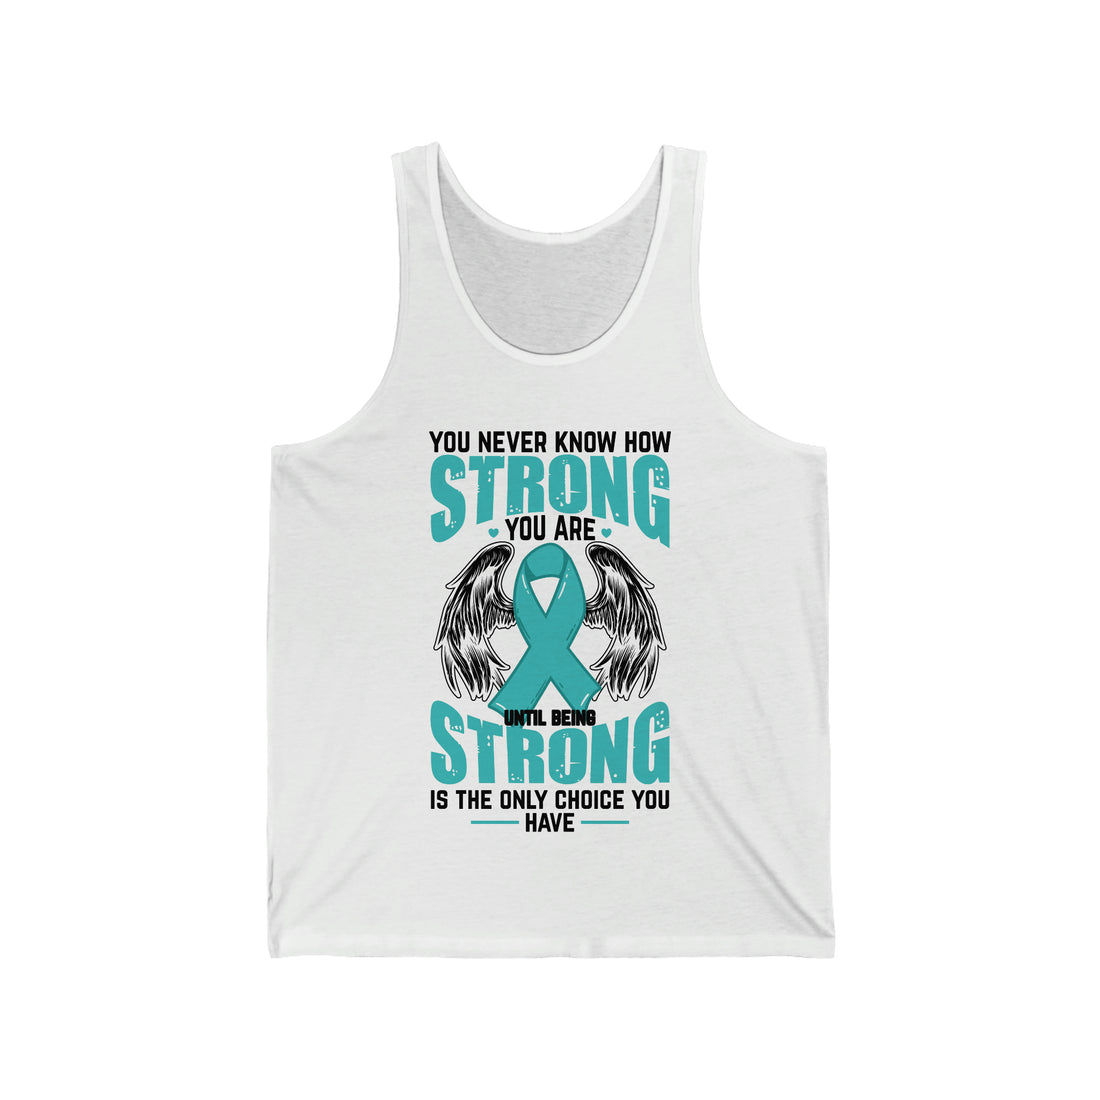 You Never Know How Strong You Are - Unisex Jersey Tank Top